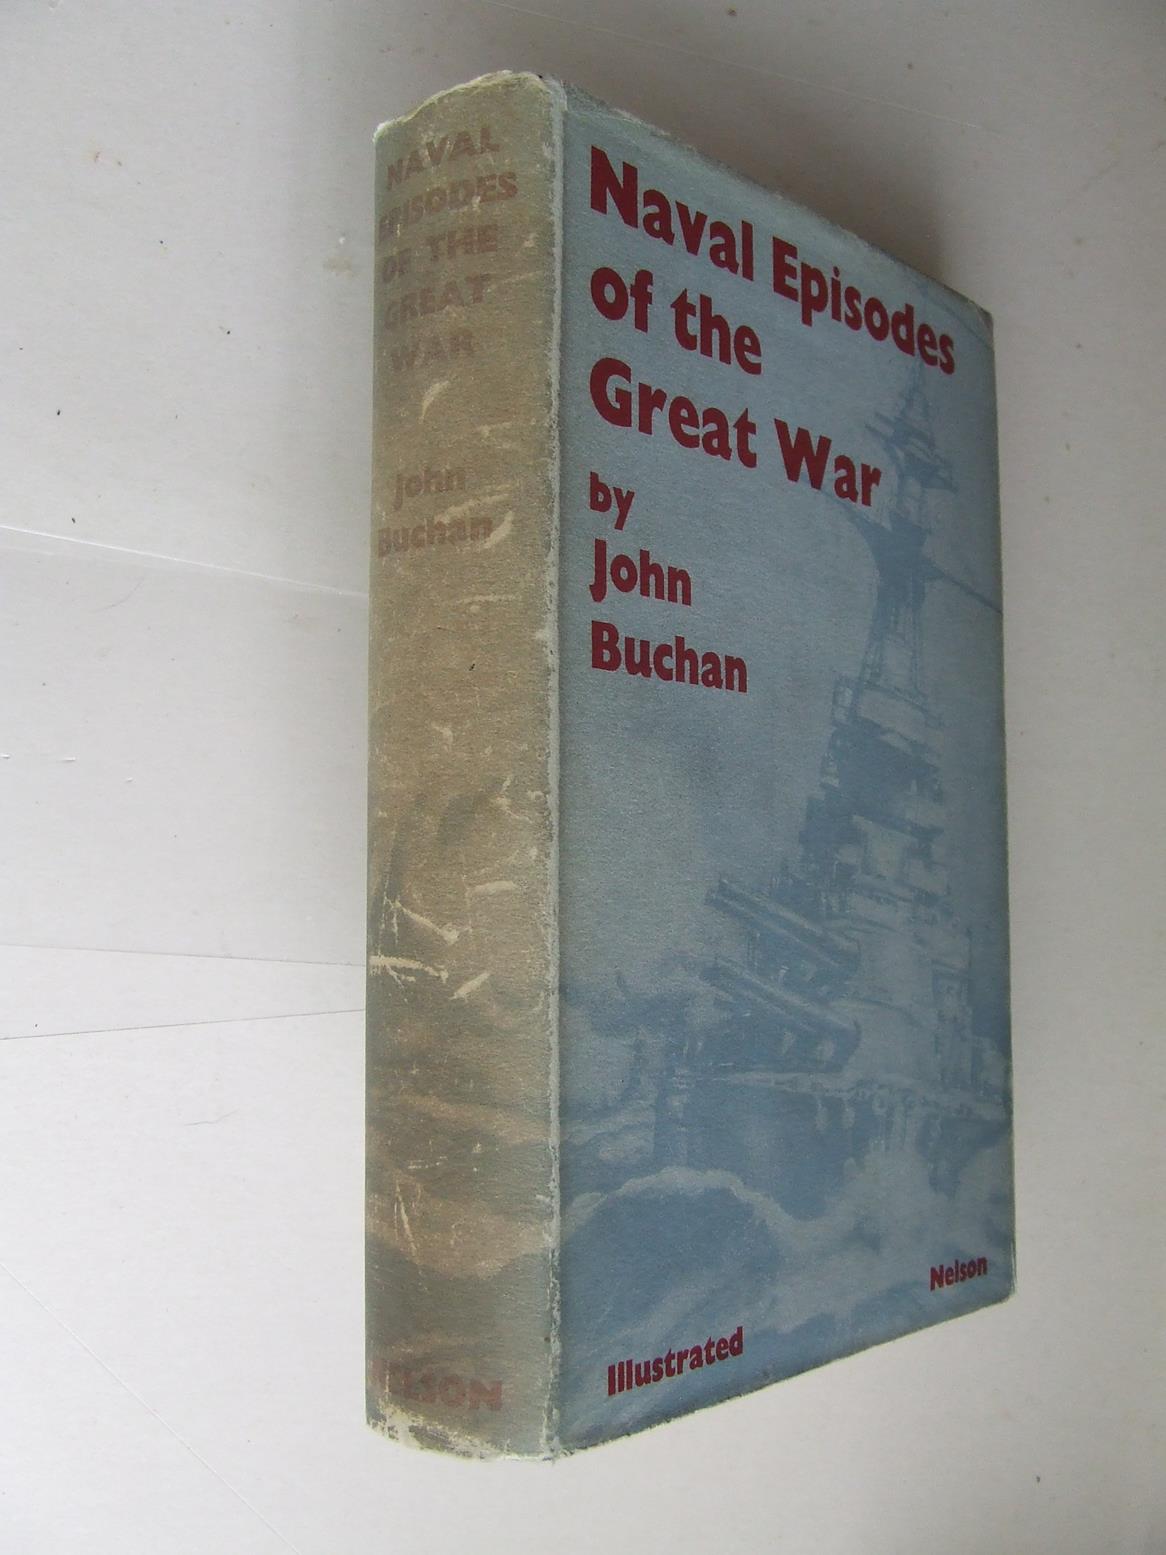 Naval Episodes of the Great War